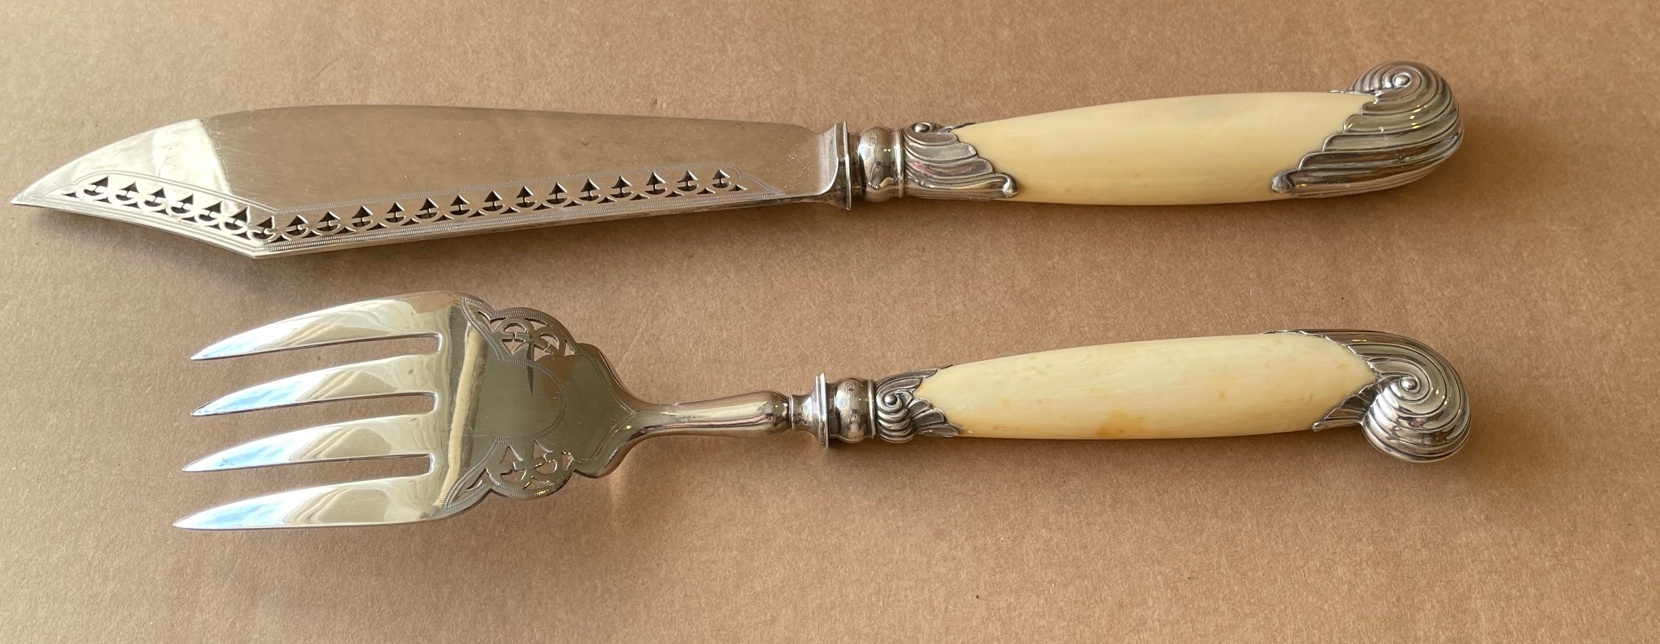 Late Victorian Silver Mounted Fish Servers - 34cm and 28cm - Sheffield 1894. - Image 4 of 6